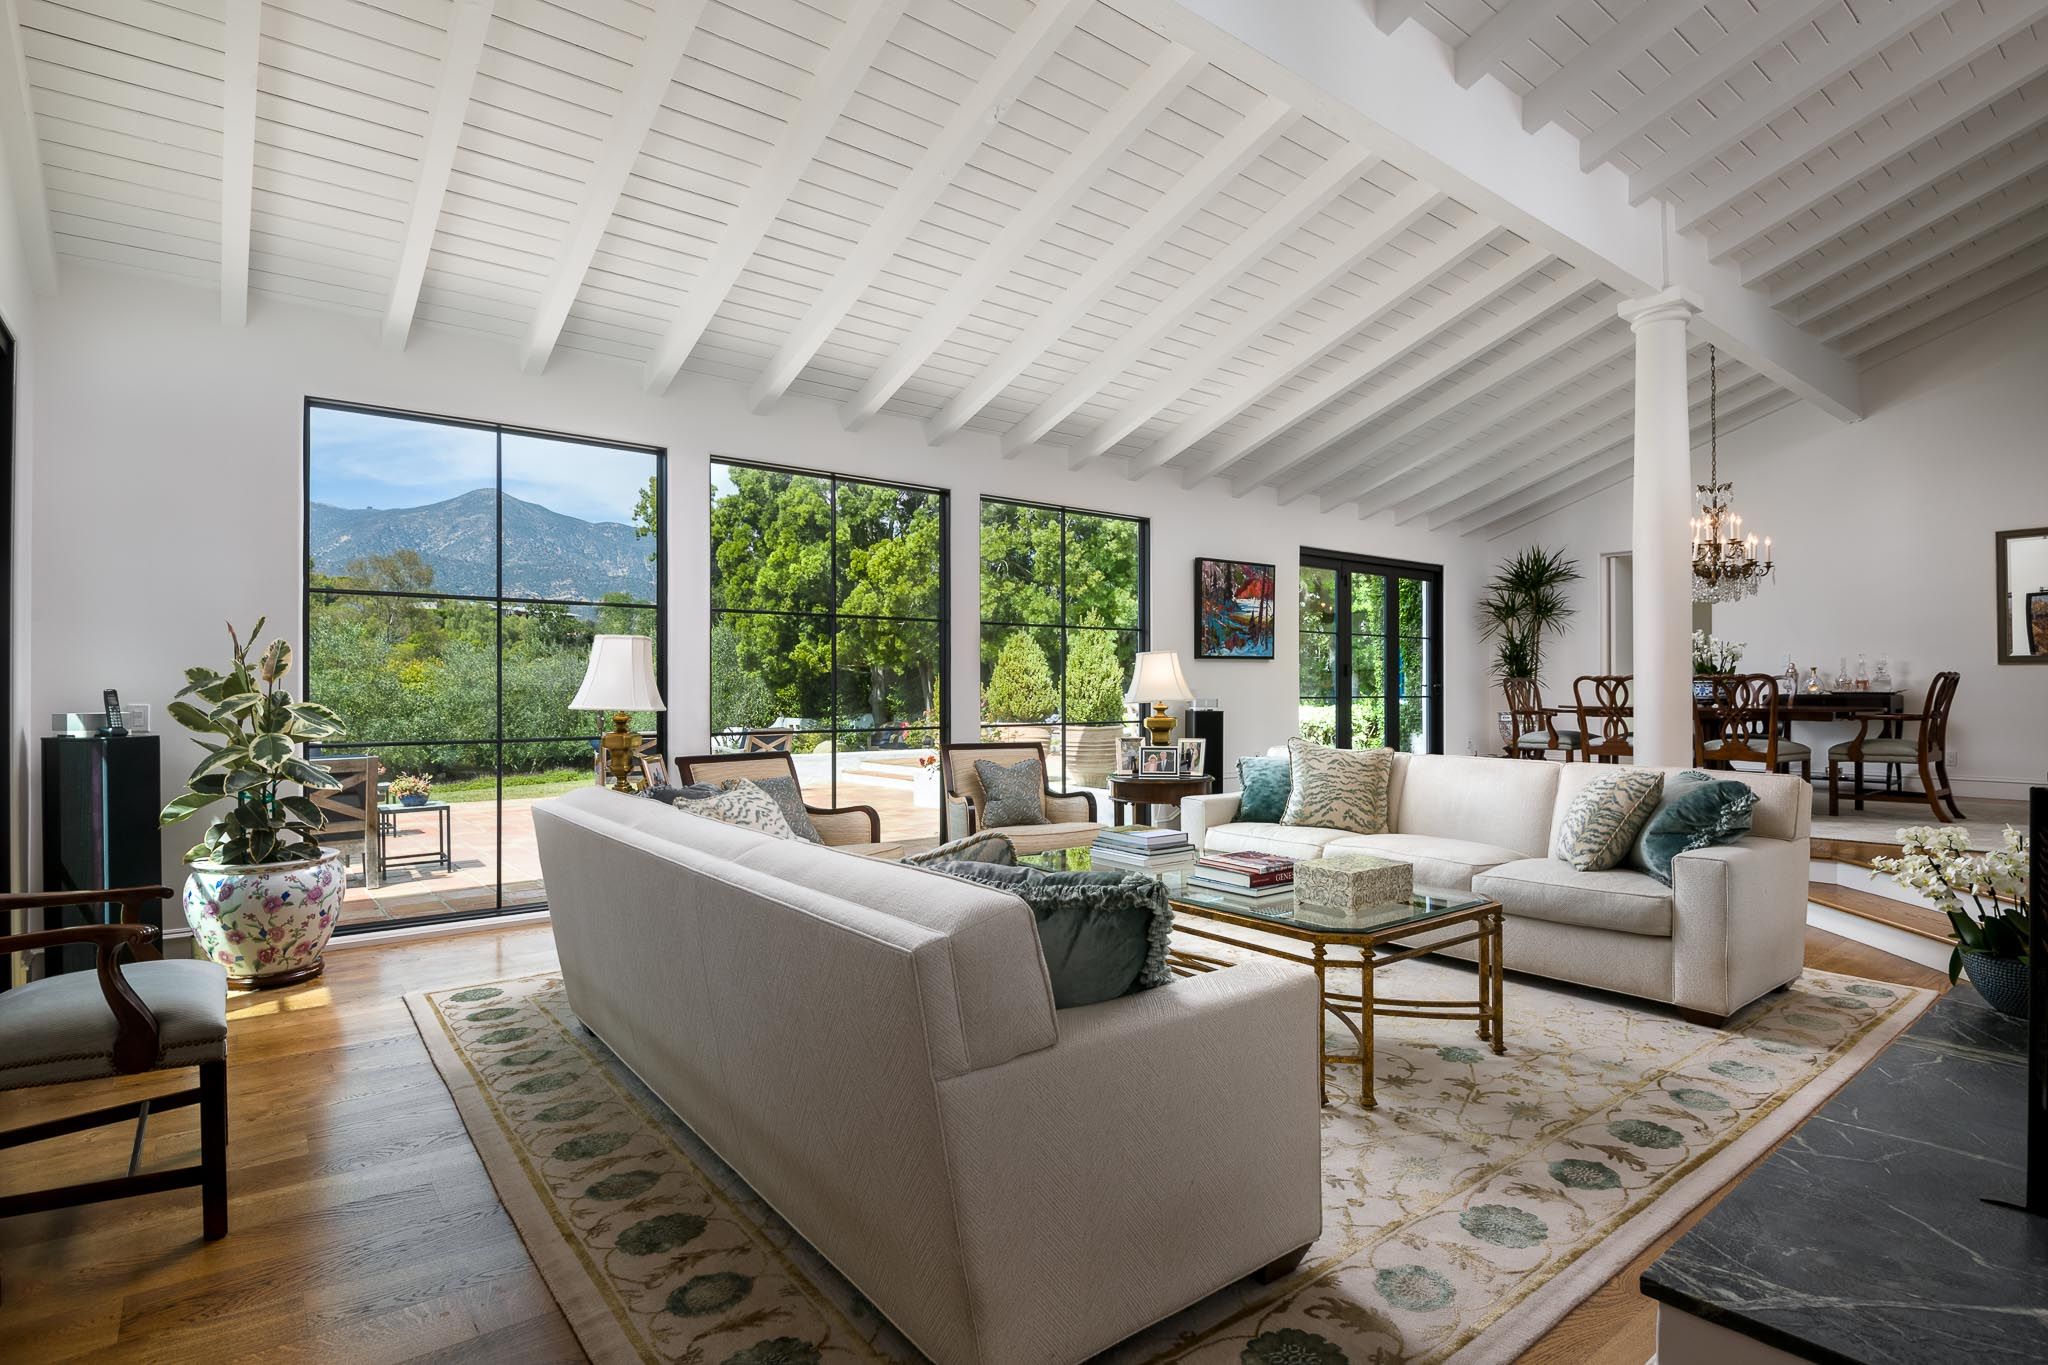 The living room of a Santa Barbara estate with windows that showcase the garden and the mountains behind